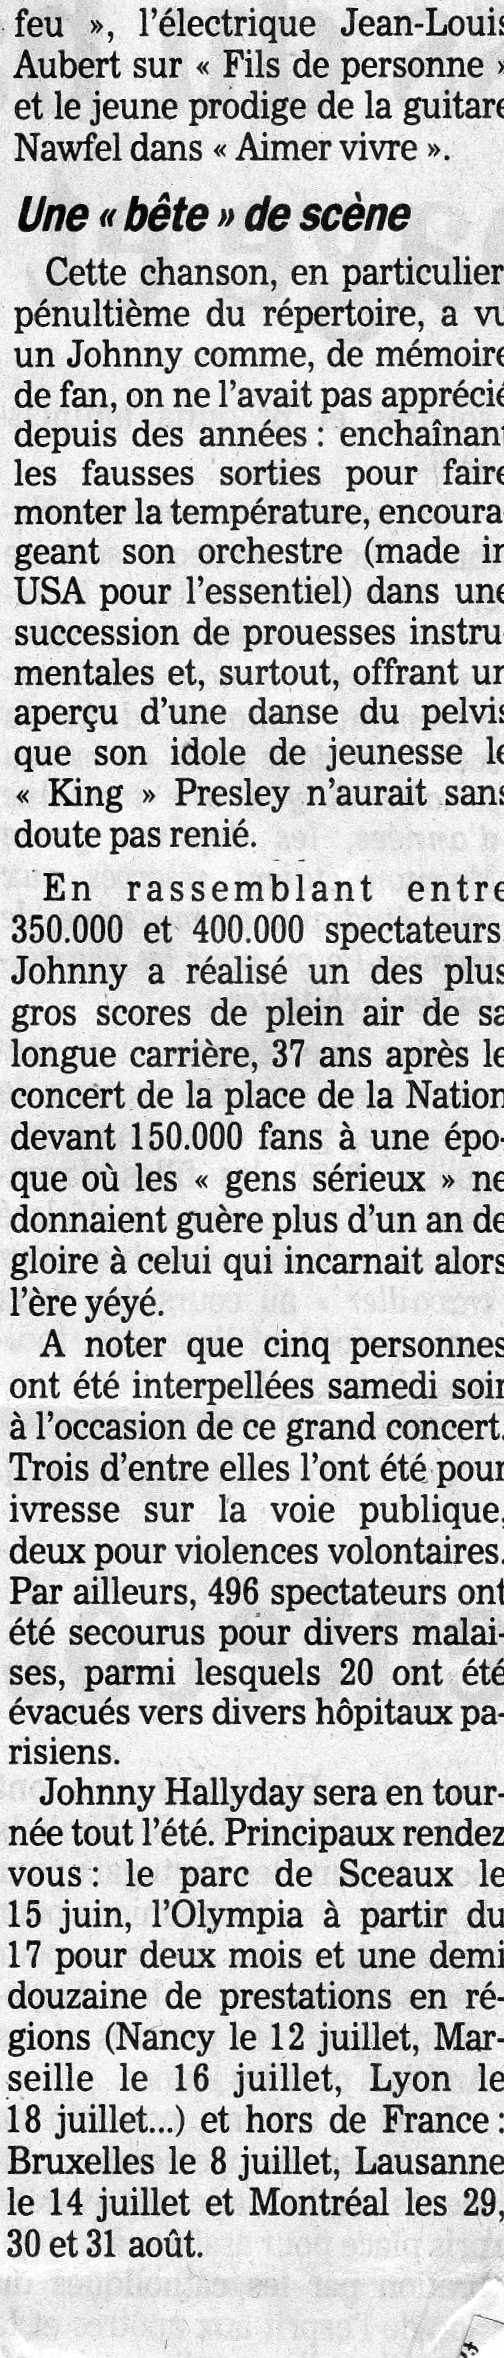 johnny l'année 2000 - Page 3 Img66411